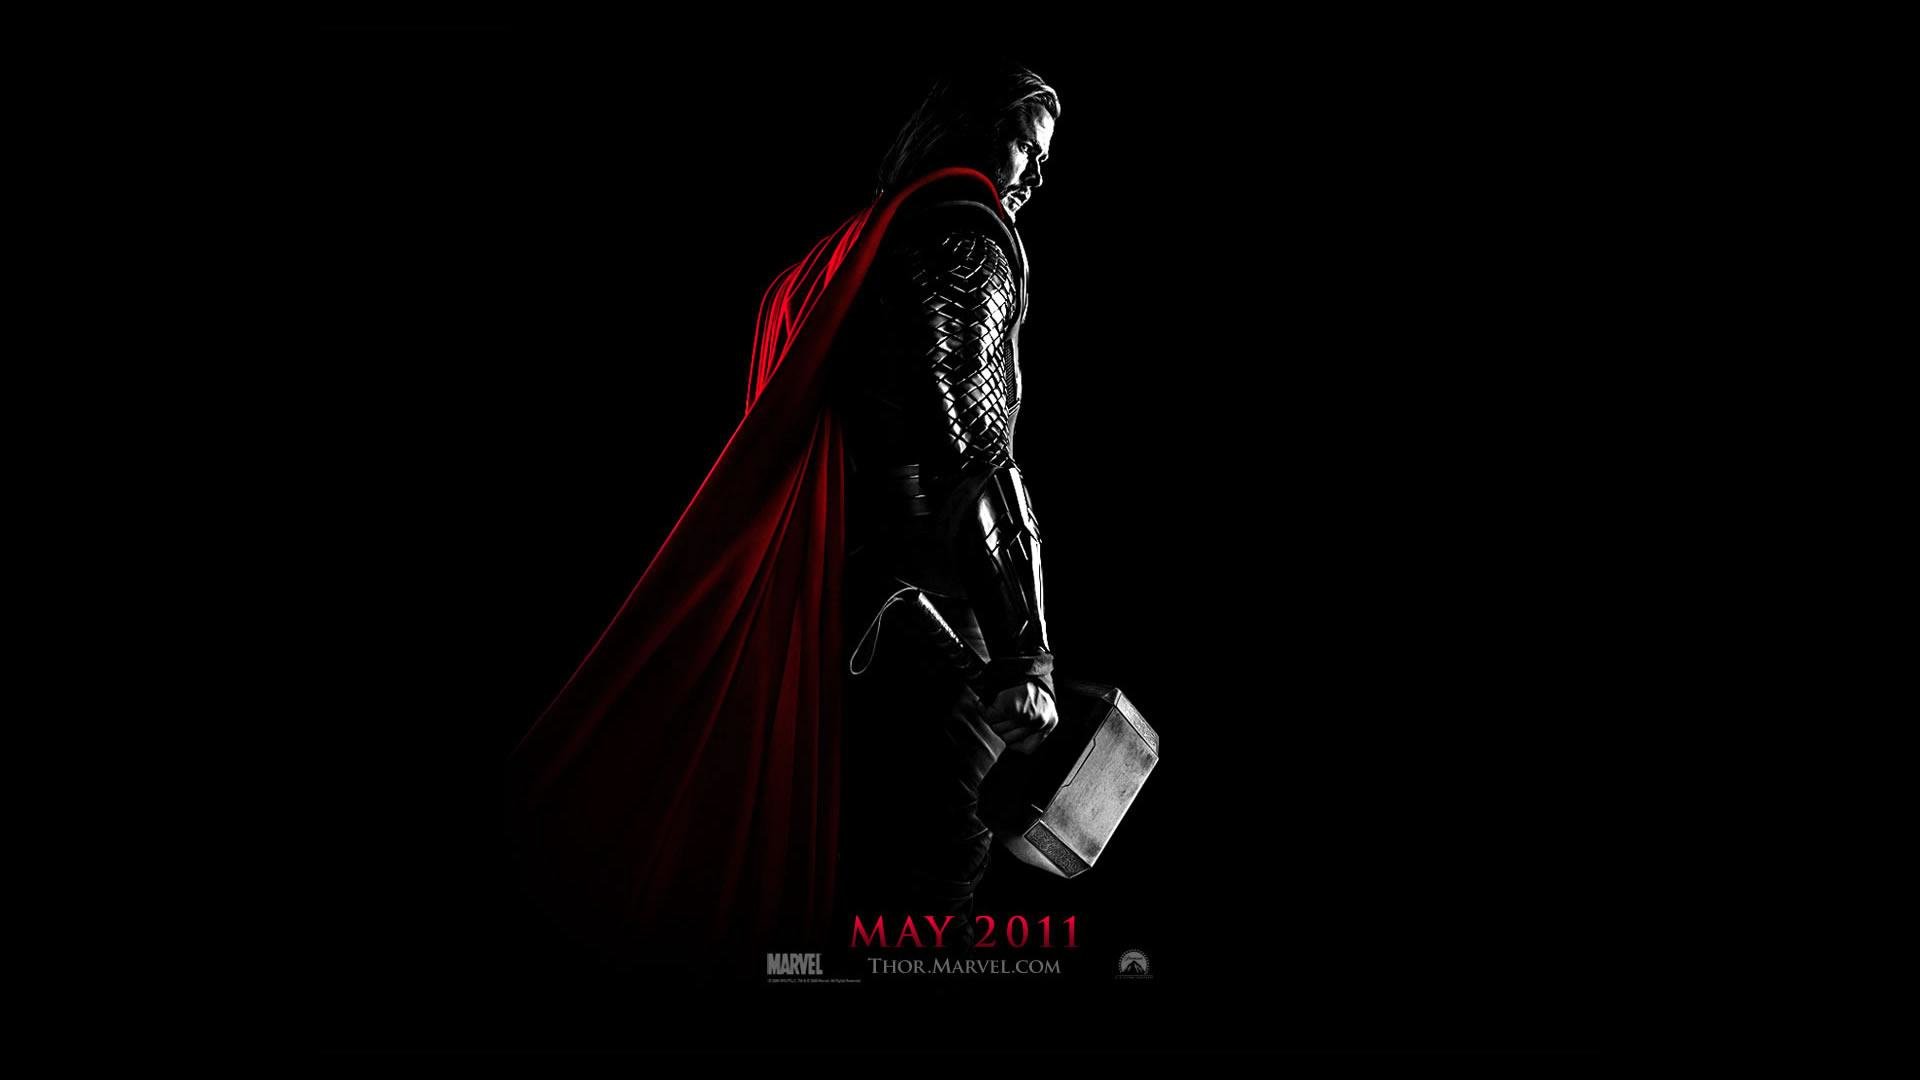 Thor hd wallpapers 1080p